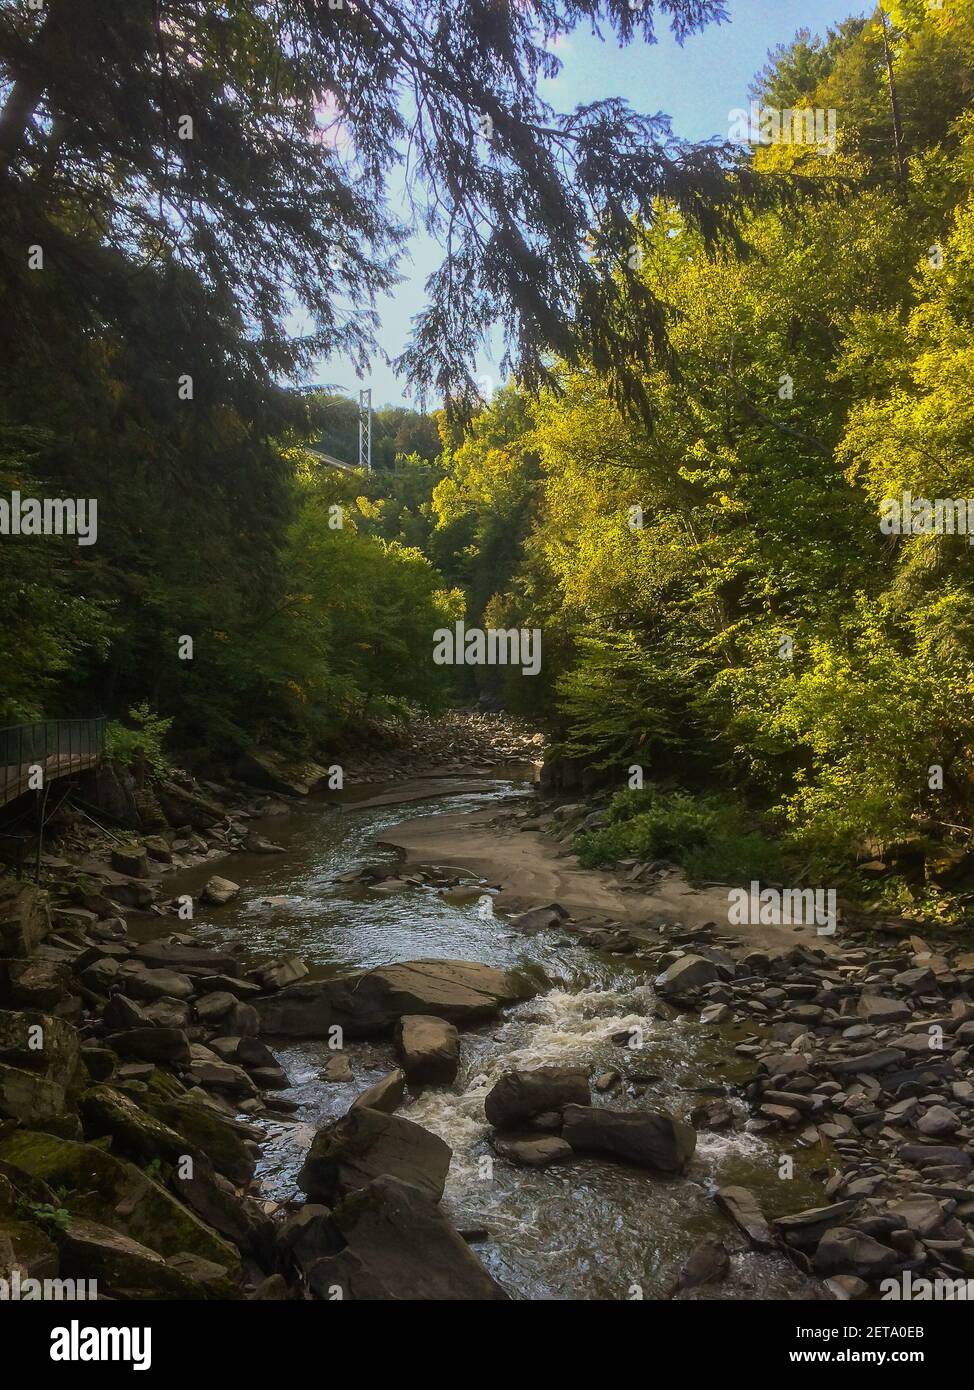 View of the Magog River in Quebec flowing though a forest, Canada Stock Photo